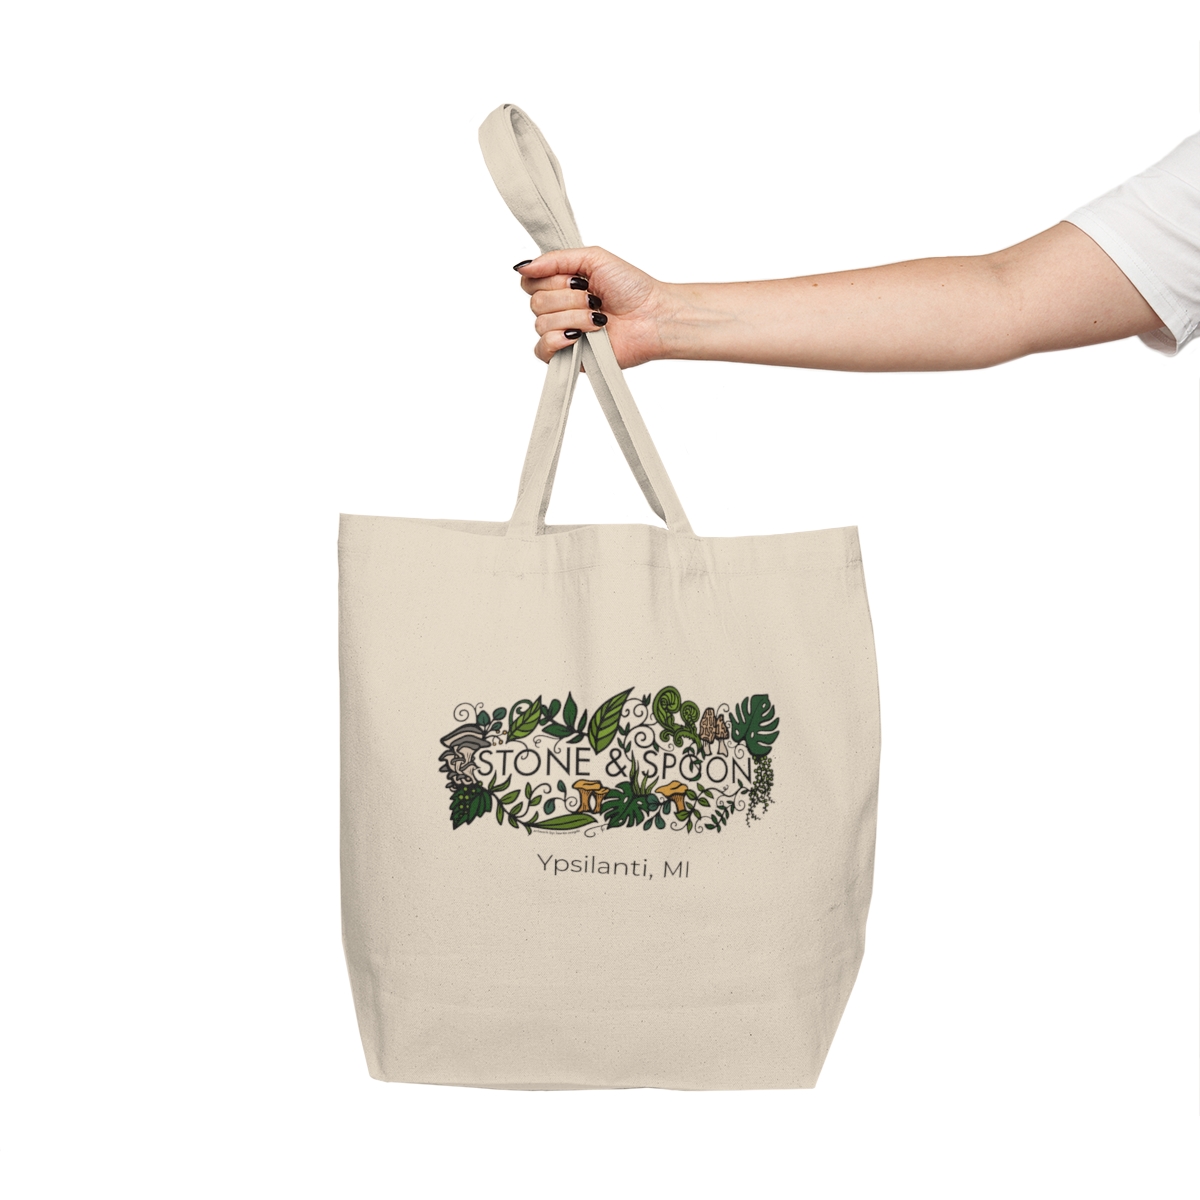 Stone & Spoon "Ypsi" Canvas Shopping Tote product thumbnail image